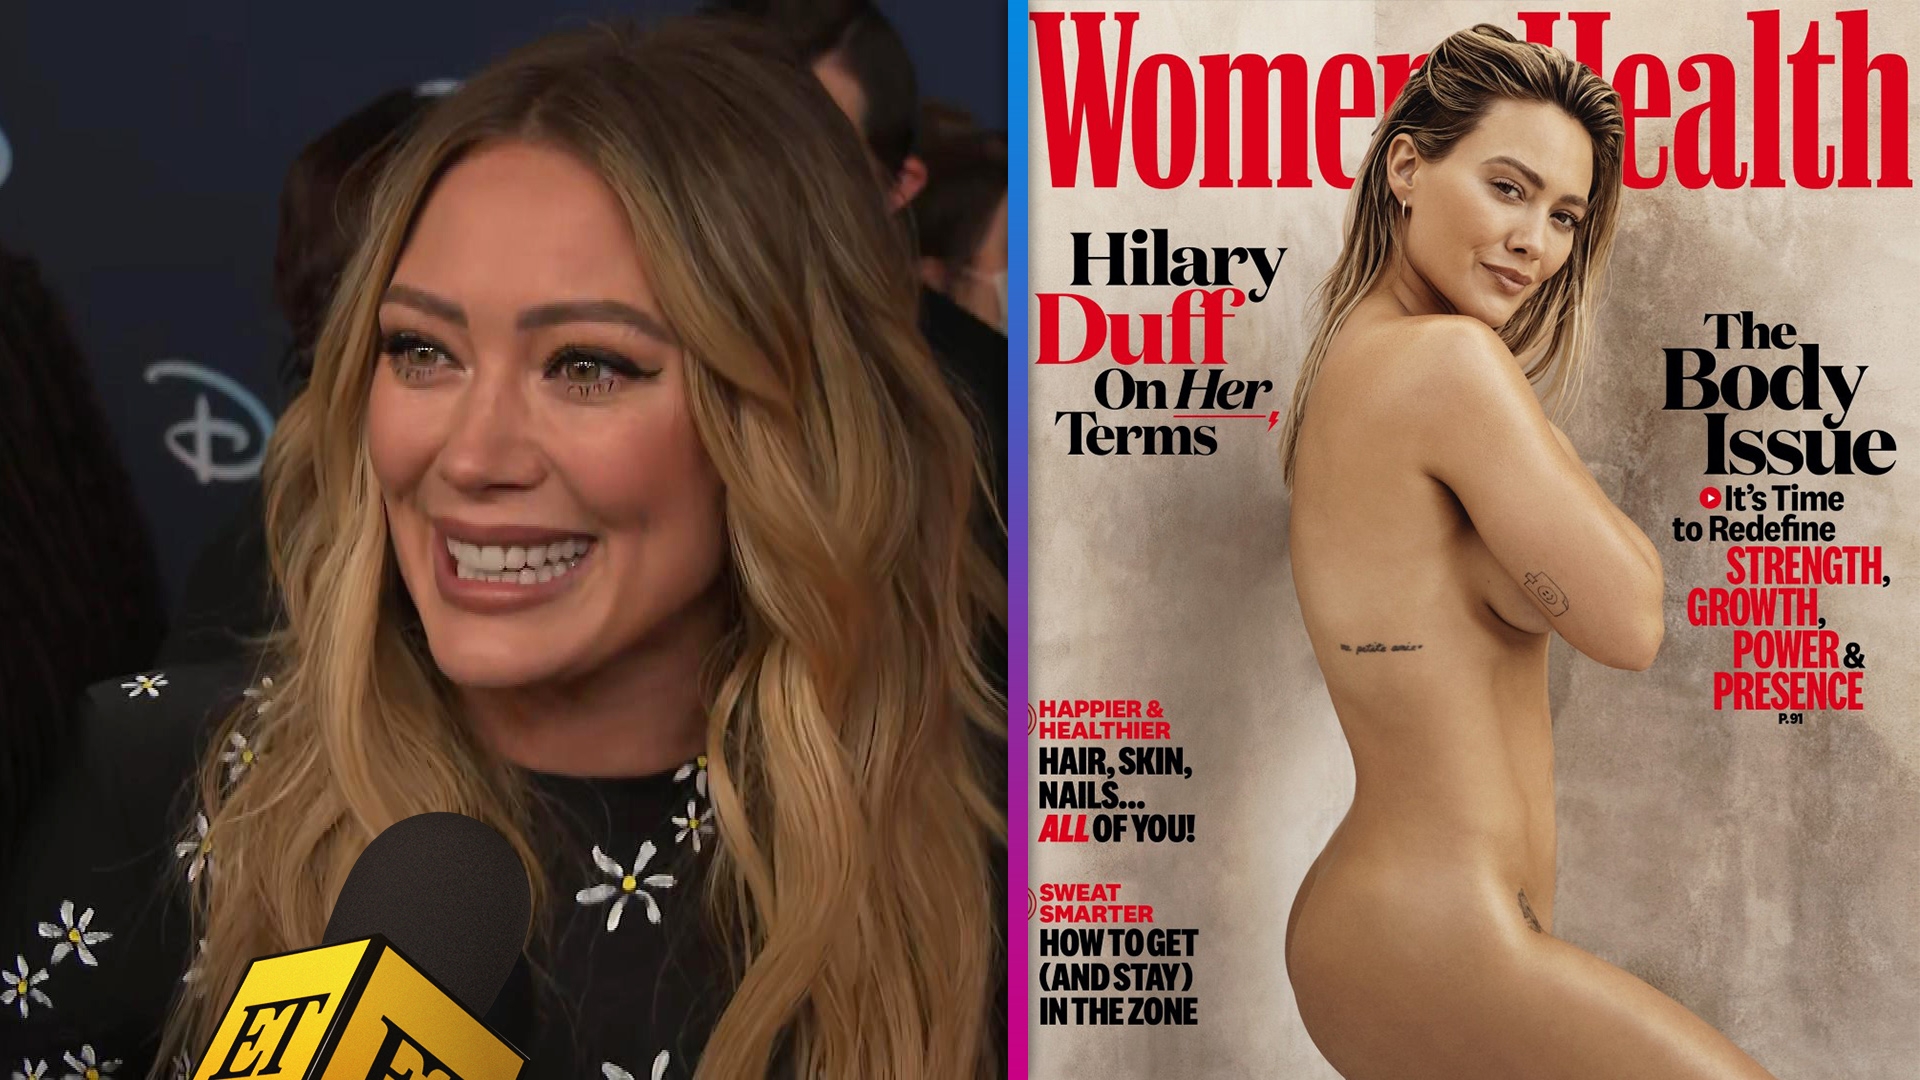 alexis mariano add naked pictures of hilary duff photo